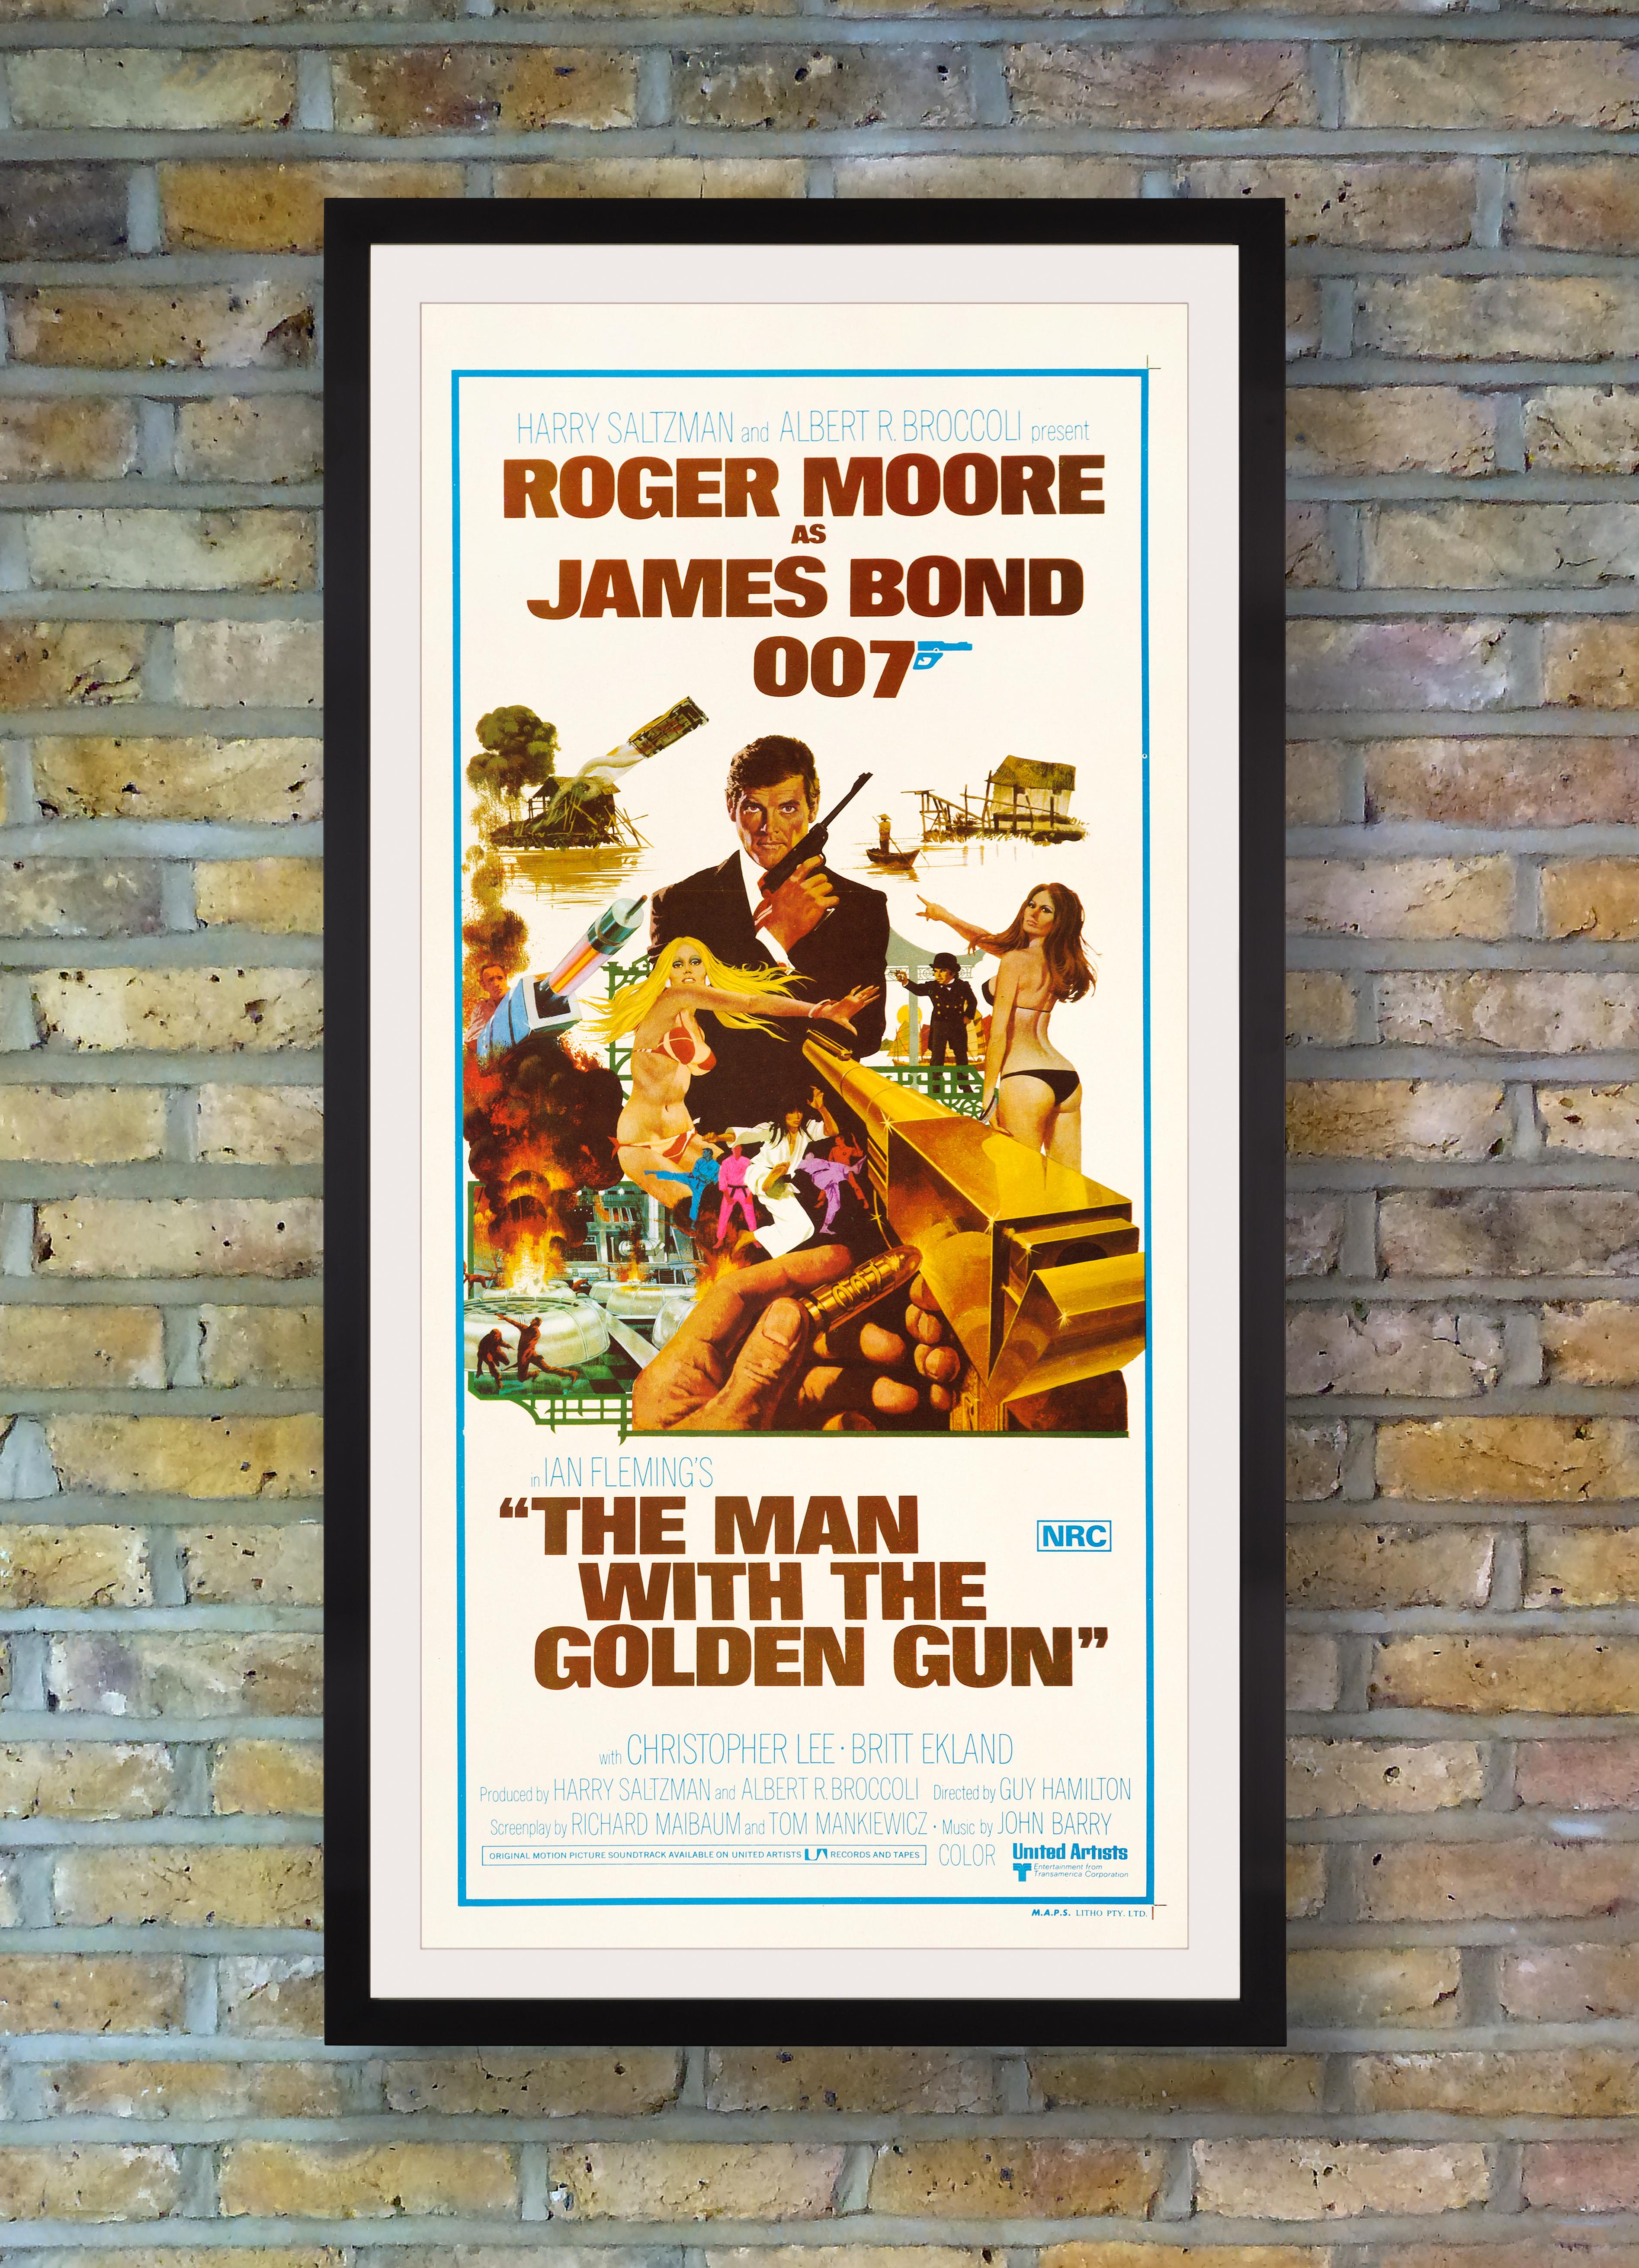 The ninth film in EON Productions' James Bond series, The Man with the Golden Gun was the fourth and final Bond film directed by Guy Hamilton and the last to be co-produced by Harry Saltzman. Roger Moore's second outing as 007 culminated in a pistol